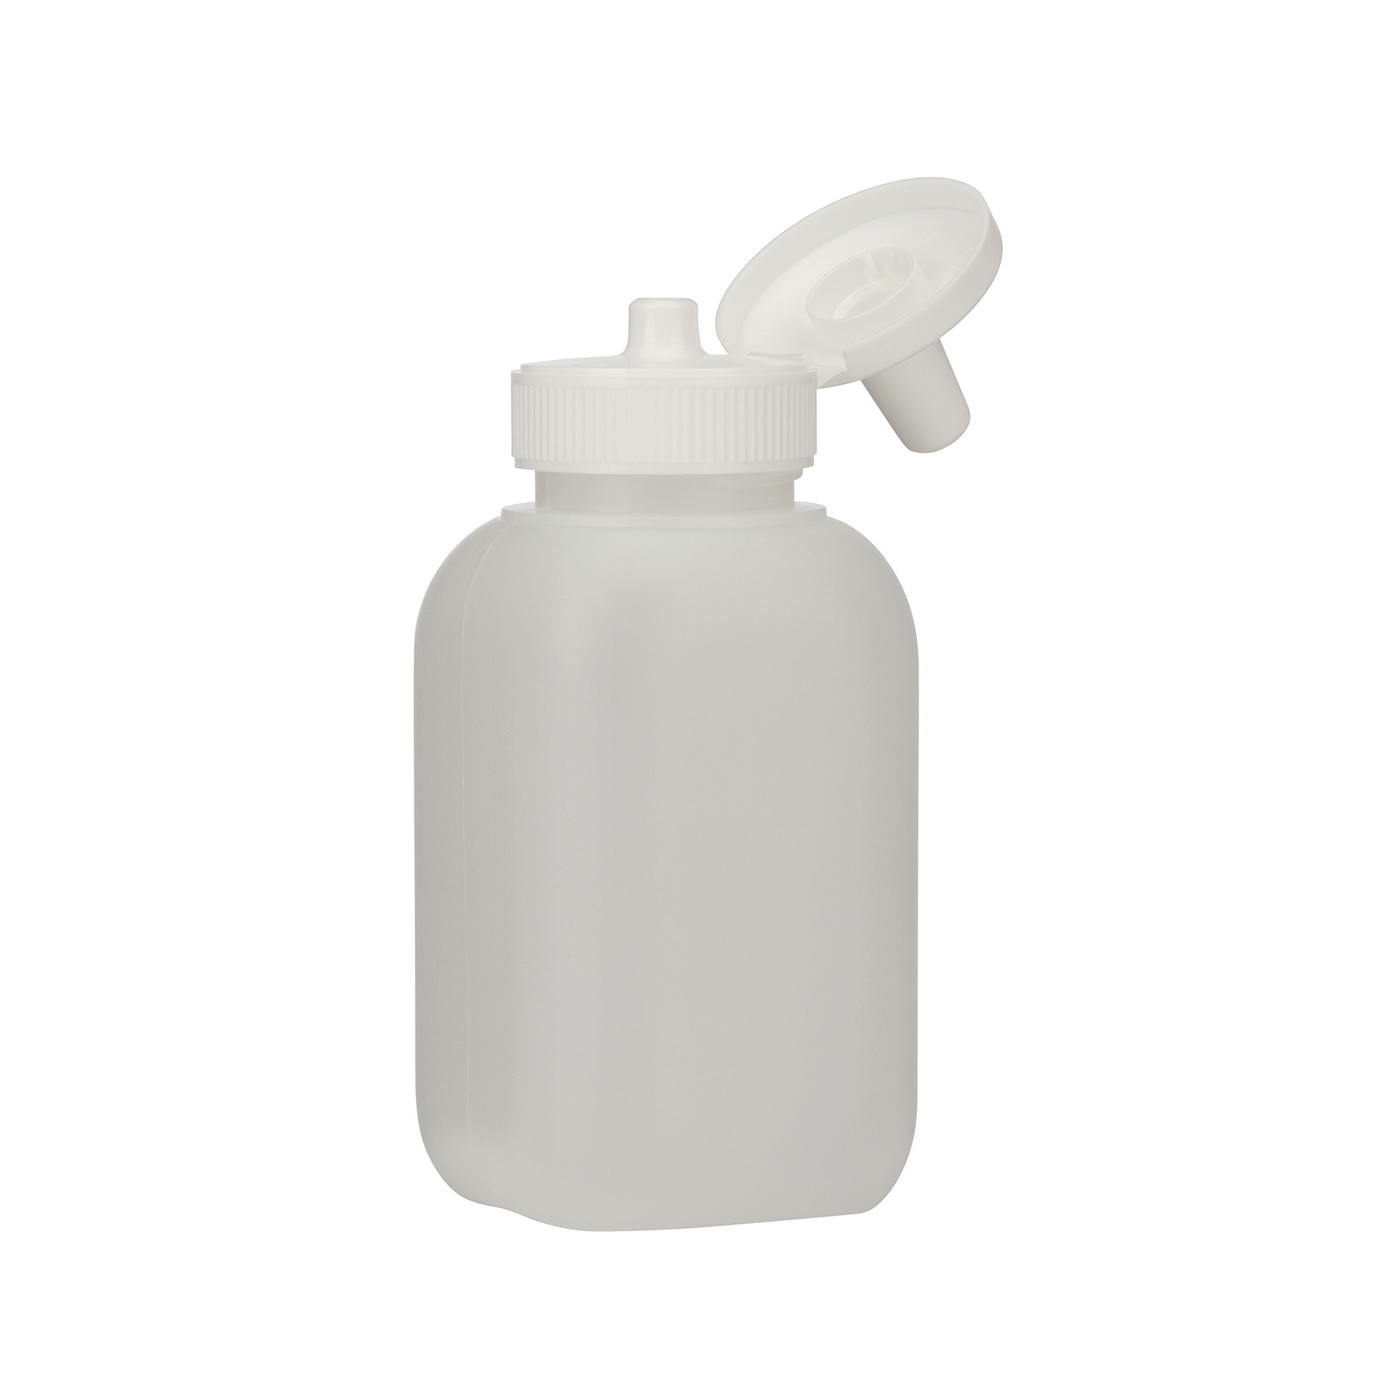 Refill Bottles, for 100 g Powder - 5 pieces